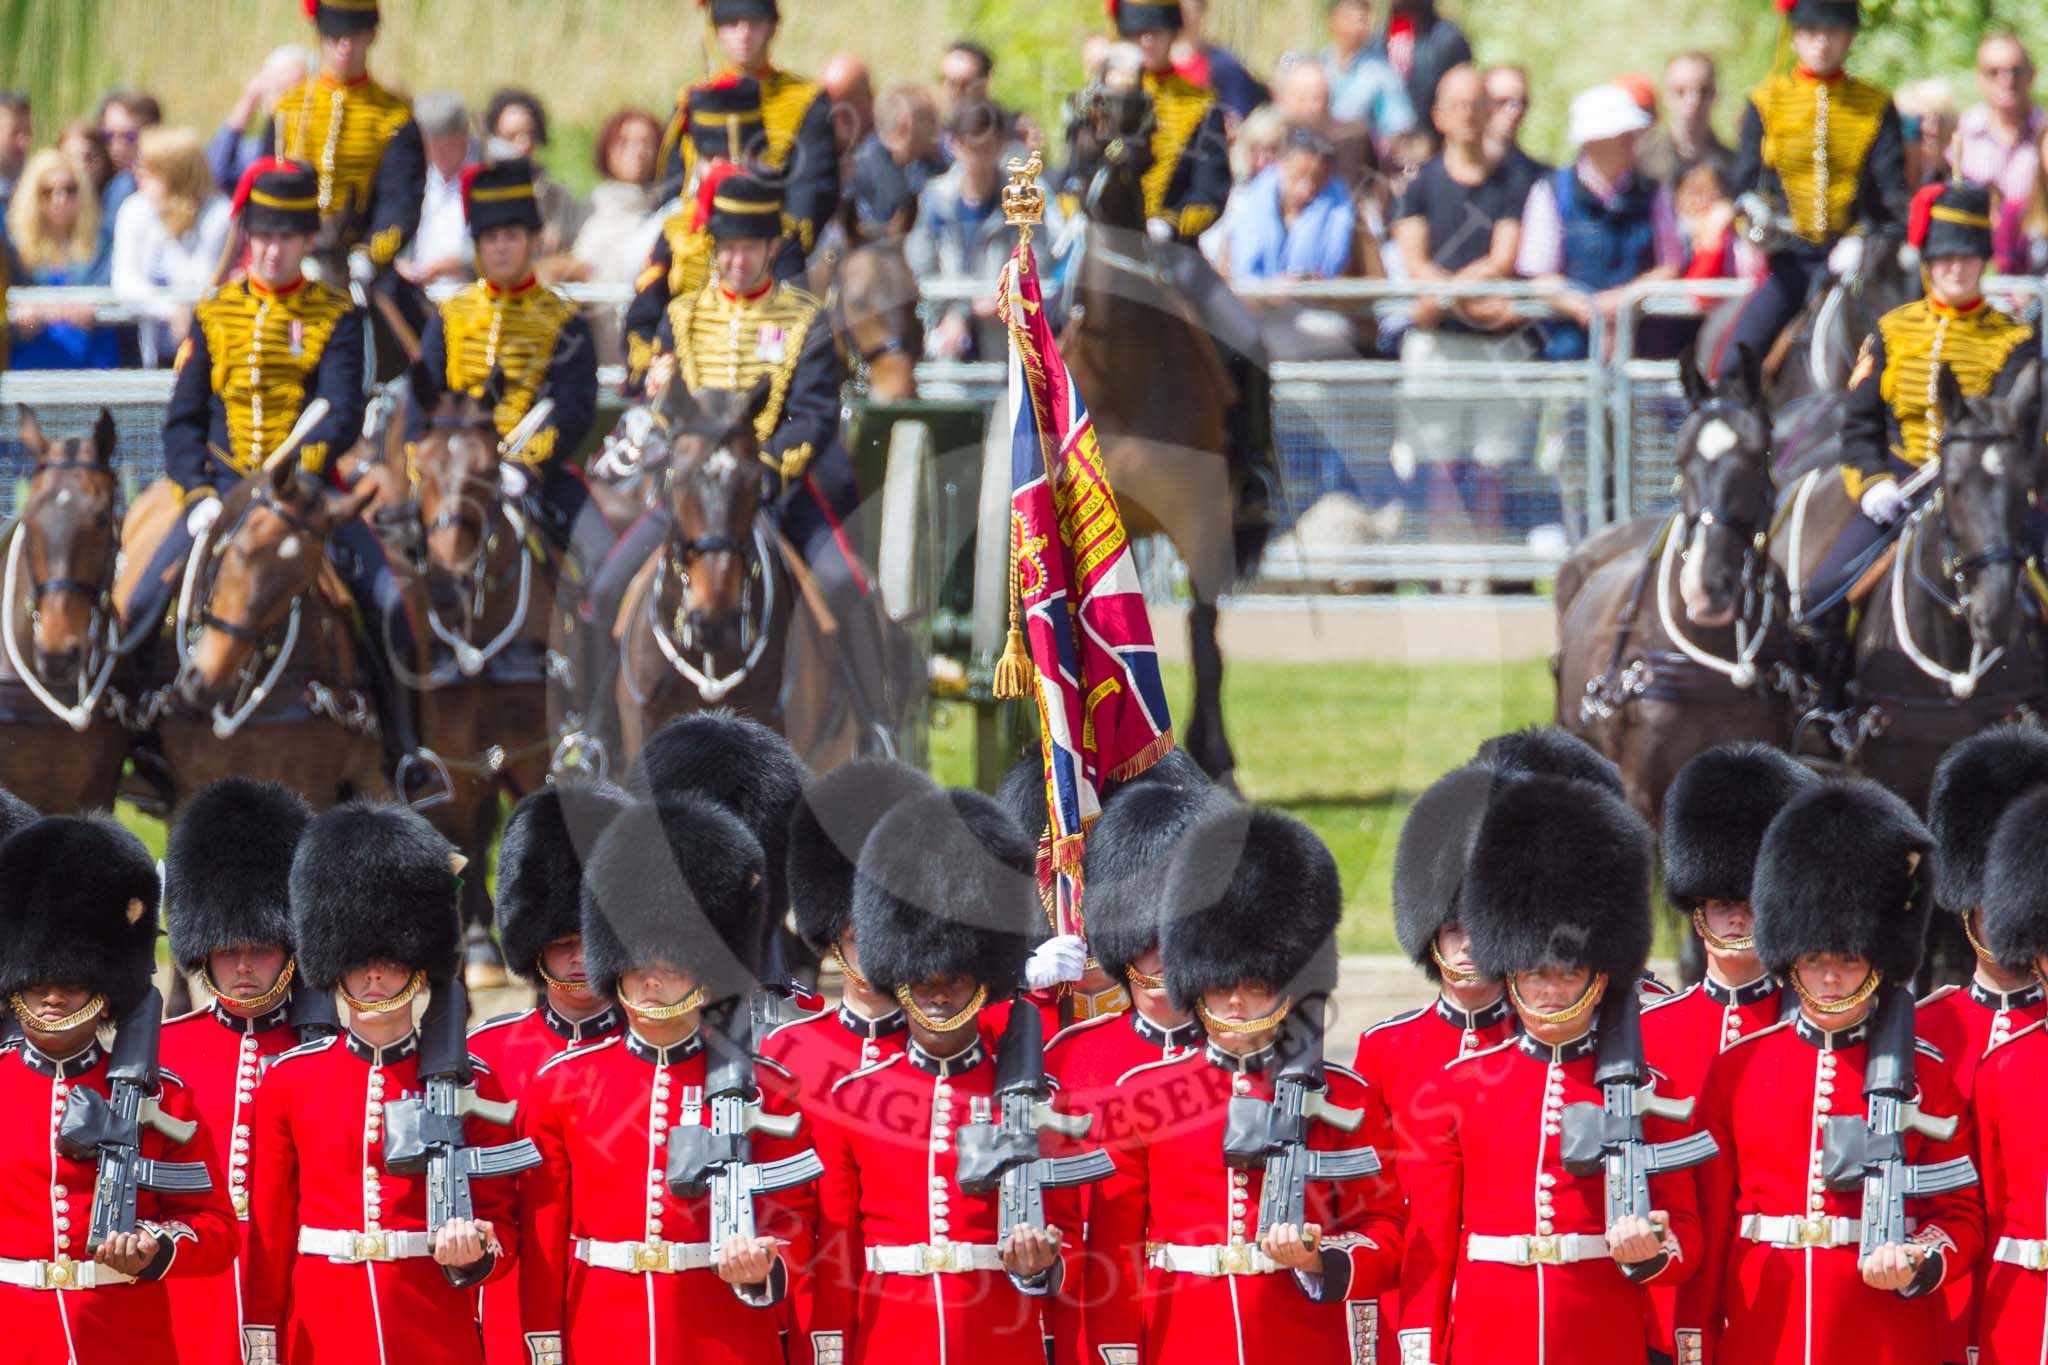 The Colonel's Review 2015.
Horse Guards Parade, Westminster,
London,

United Kingdom,
on 06 June 2015 at 11:27, image #340